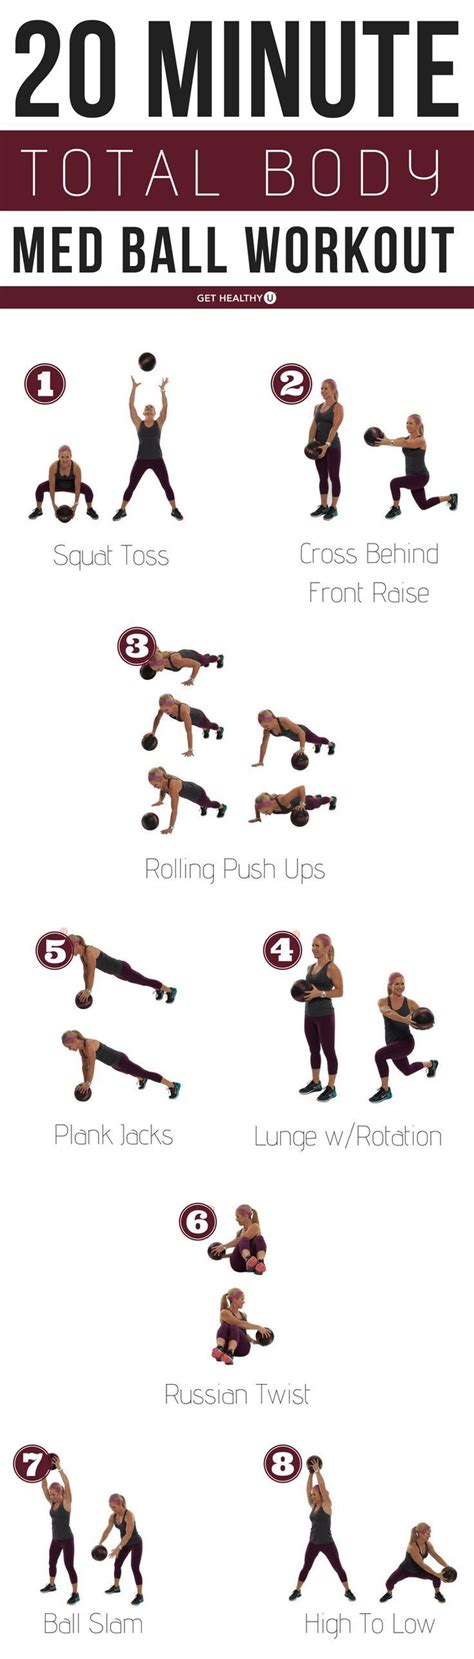 Are You Looking For A Workout That Will Get Your Whole Body Moving